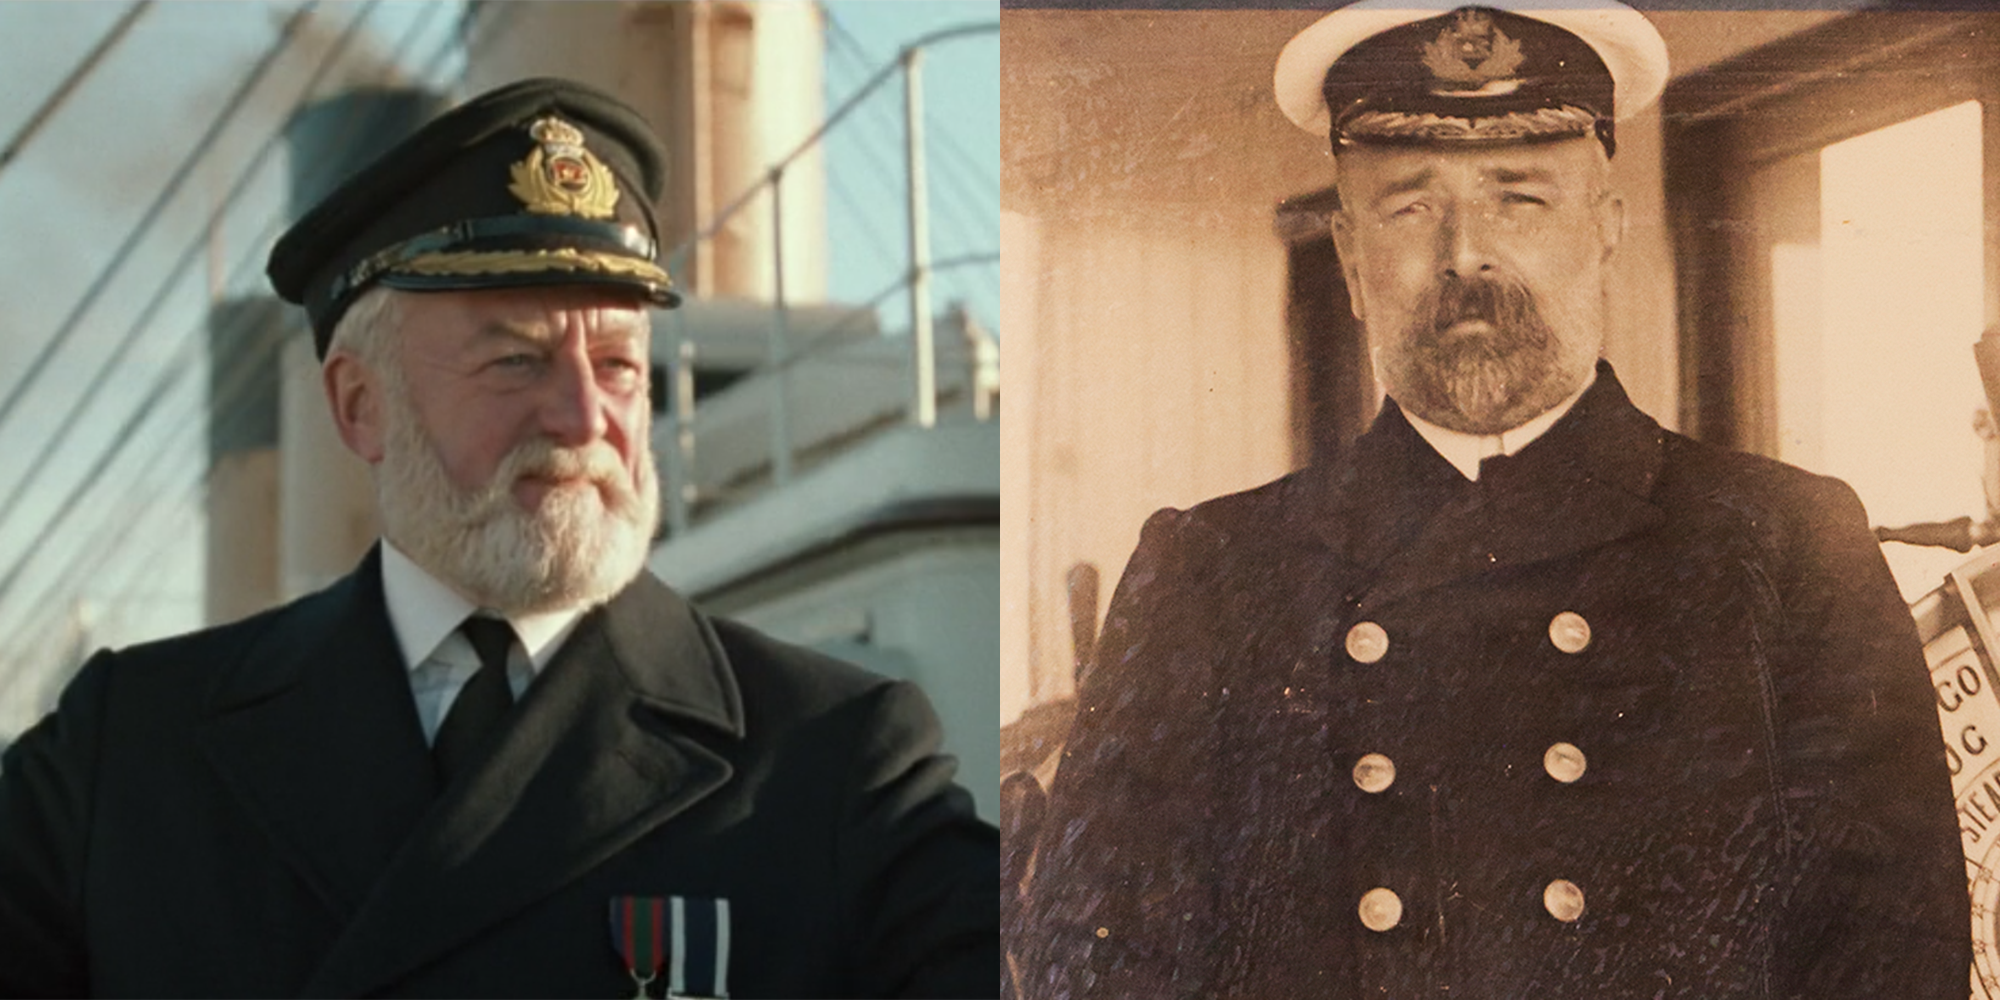 19 Photos of Titanic Characters With Their Real-Life Counterparts